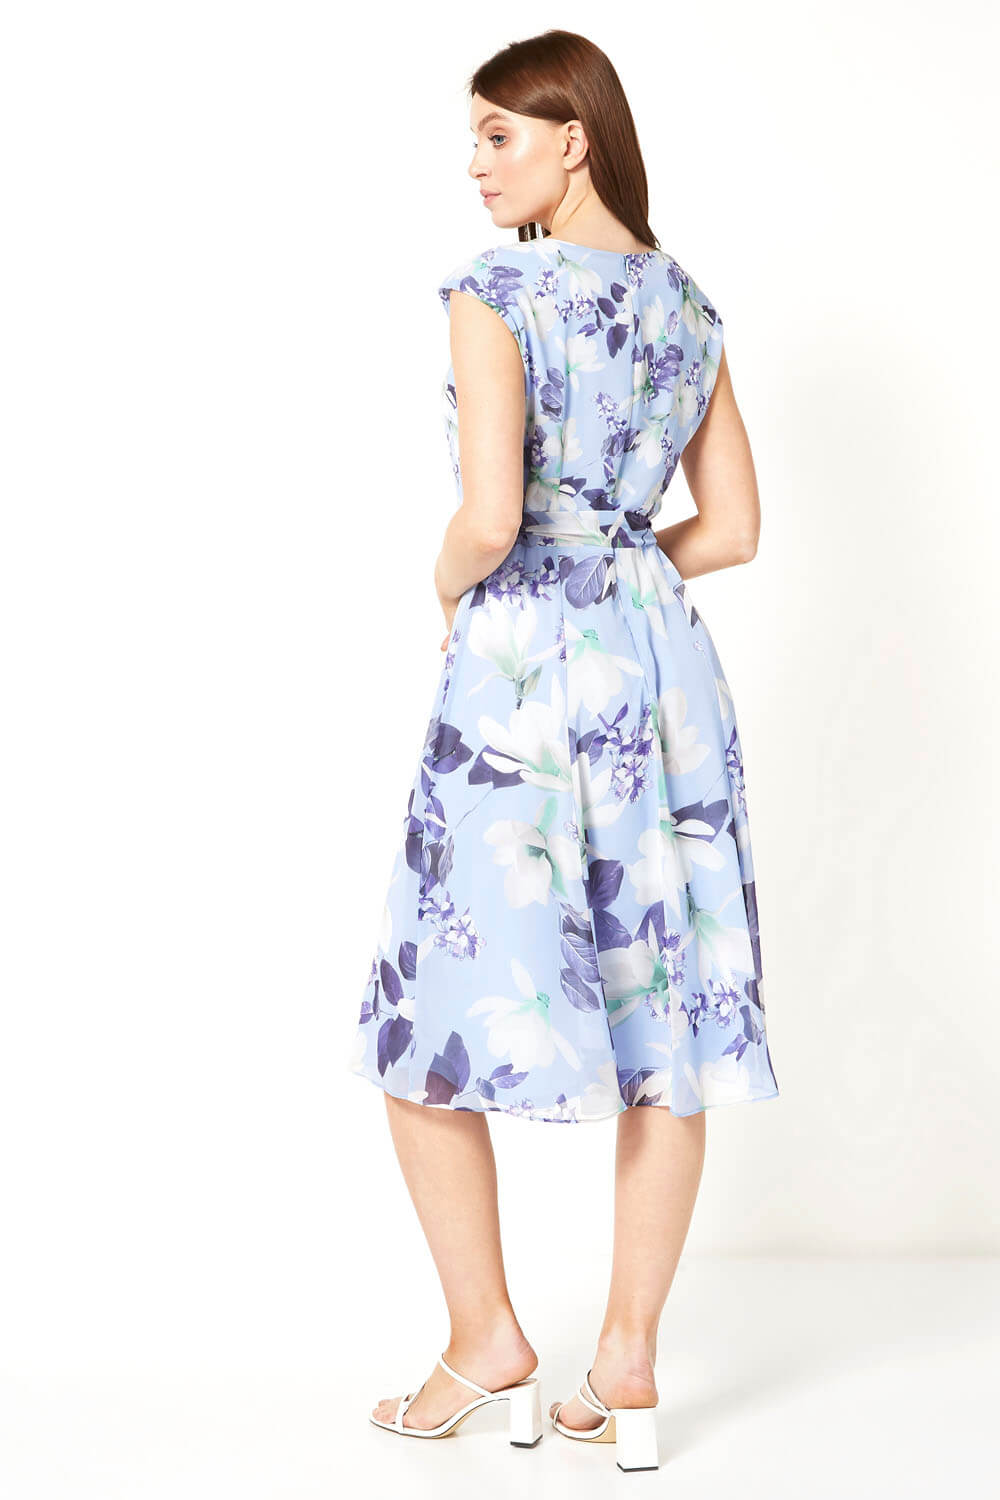 Lilac Floral Fit and Flare Belted Dress, Image 3 of 5